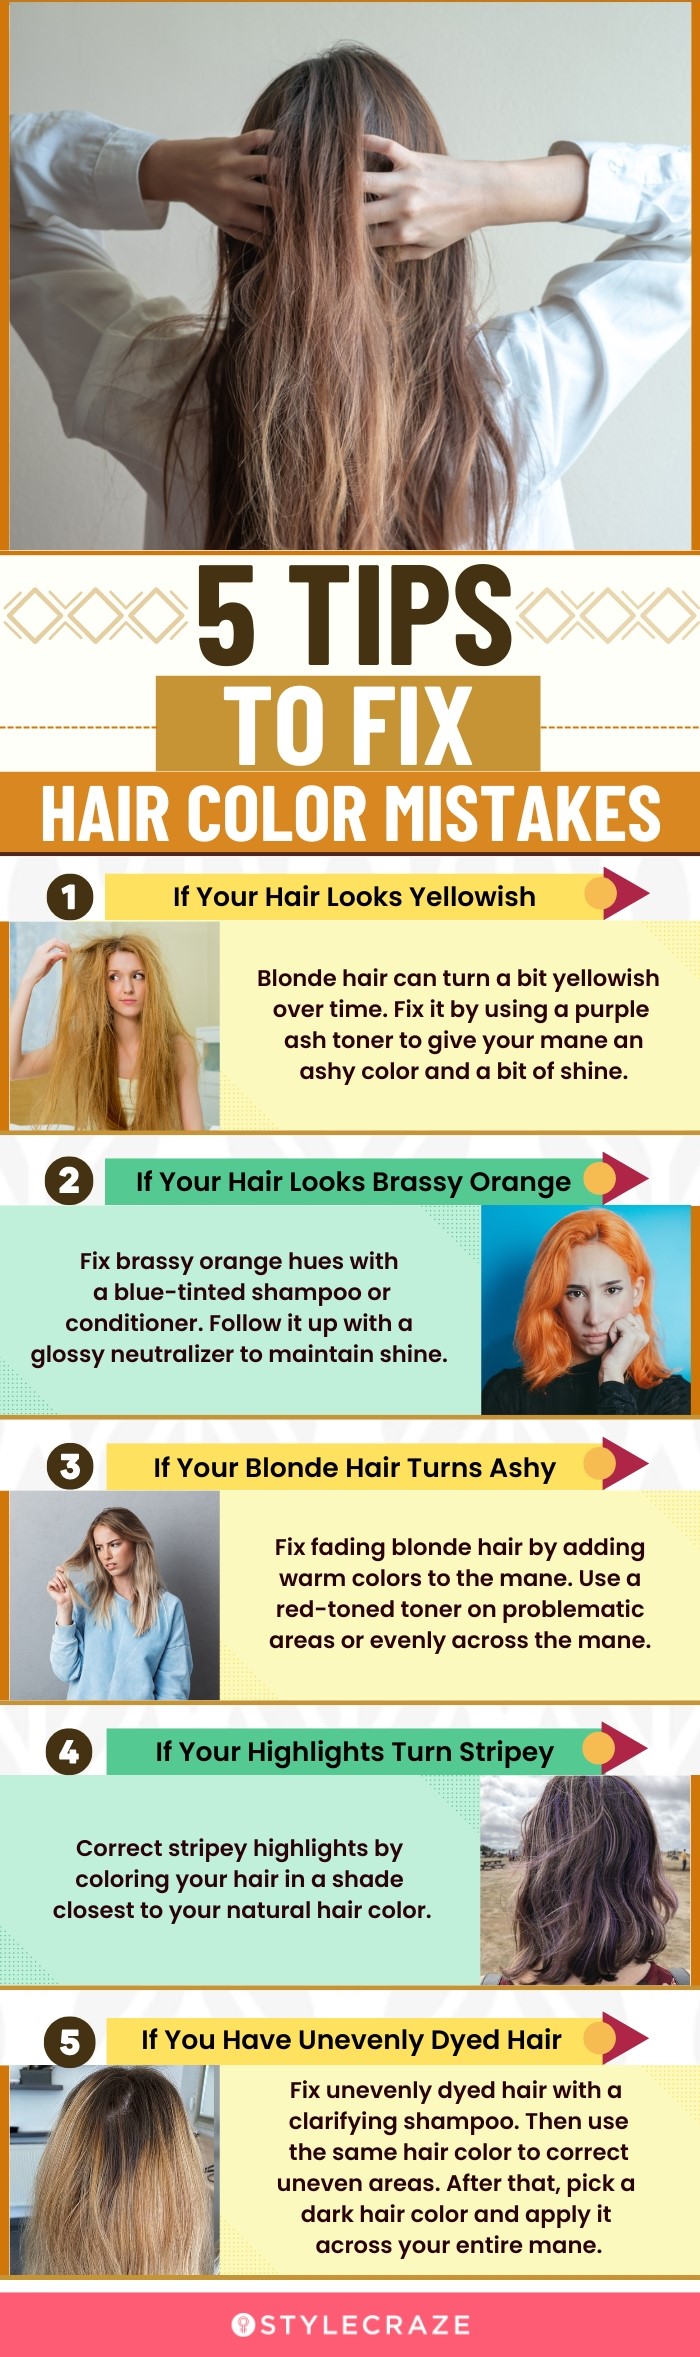 5 tips to fix hair color mistake (infographic)